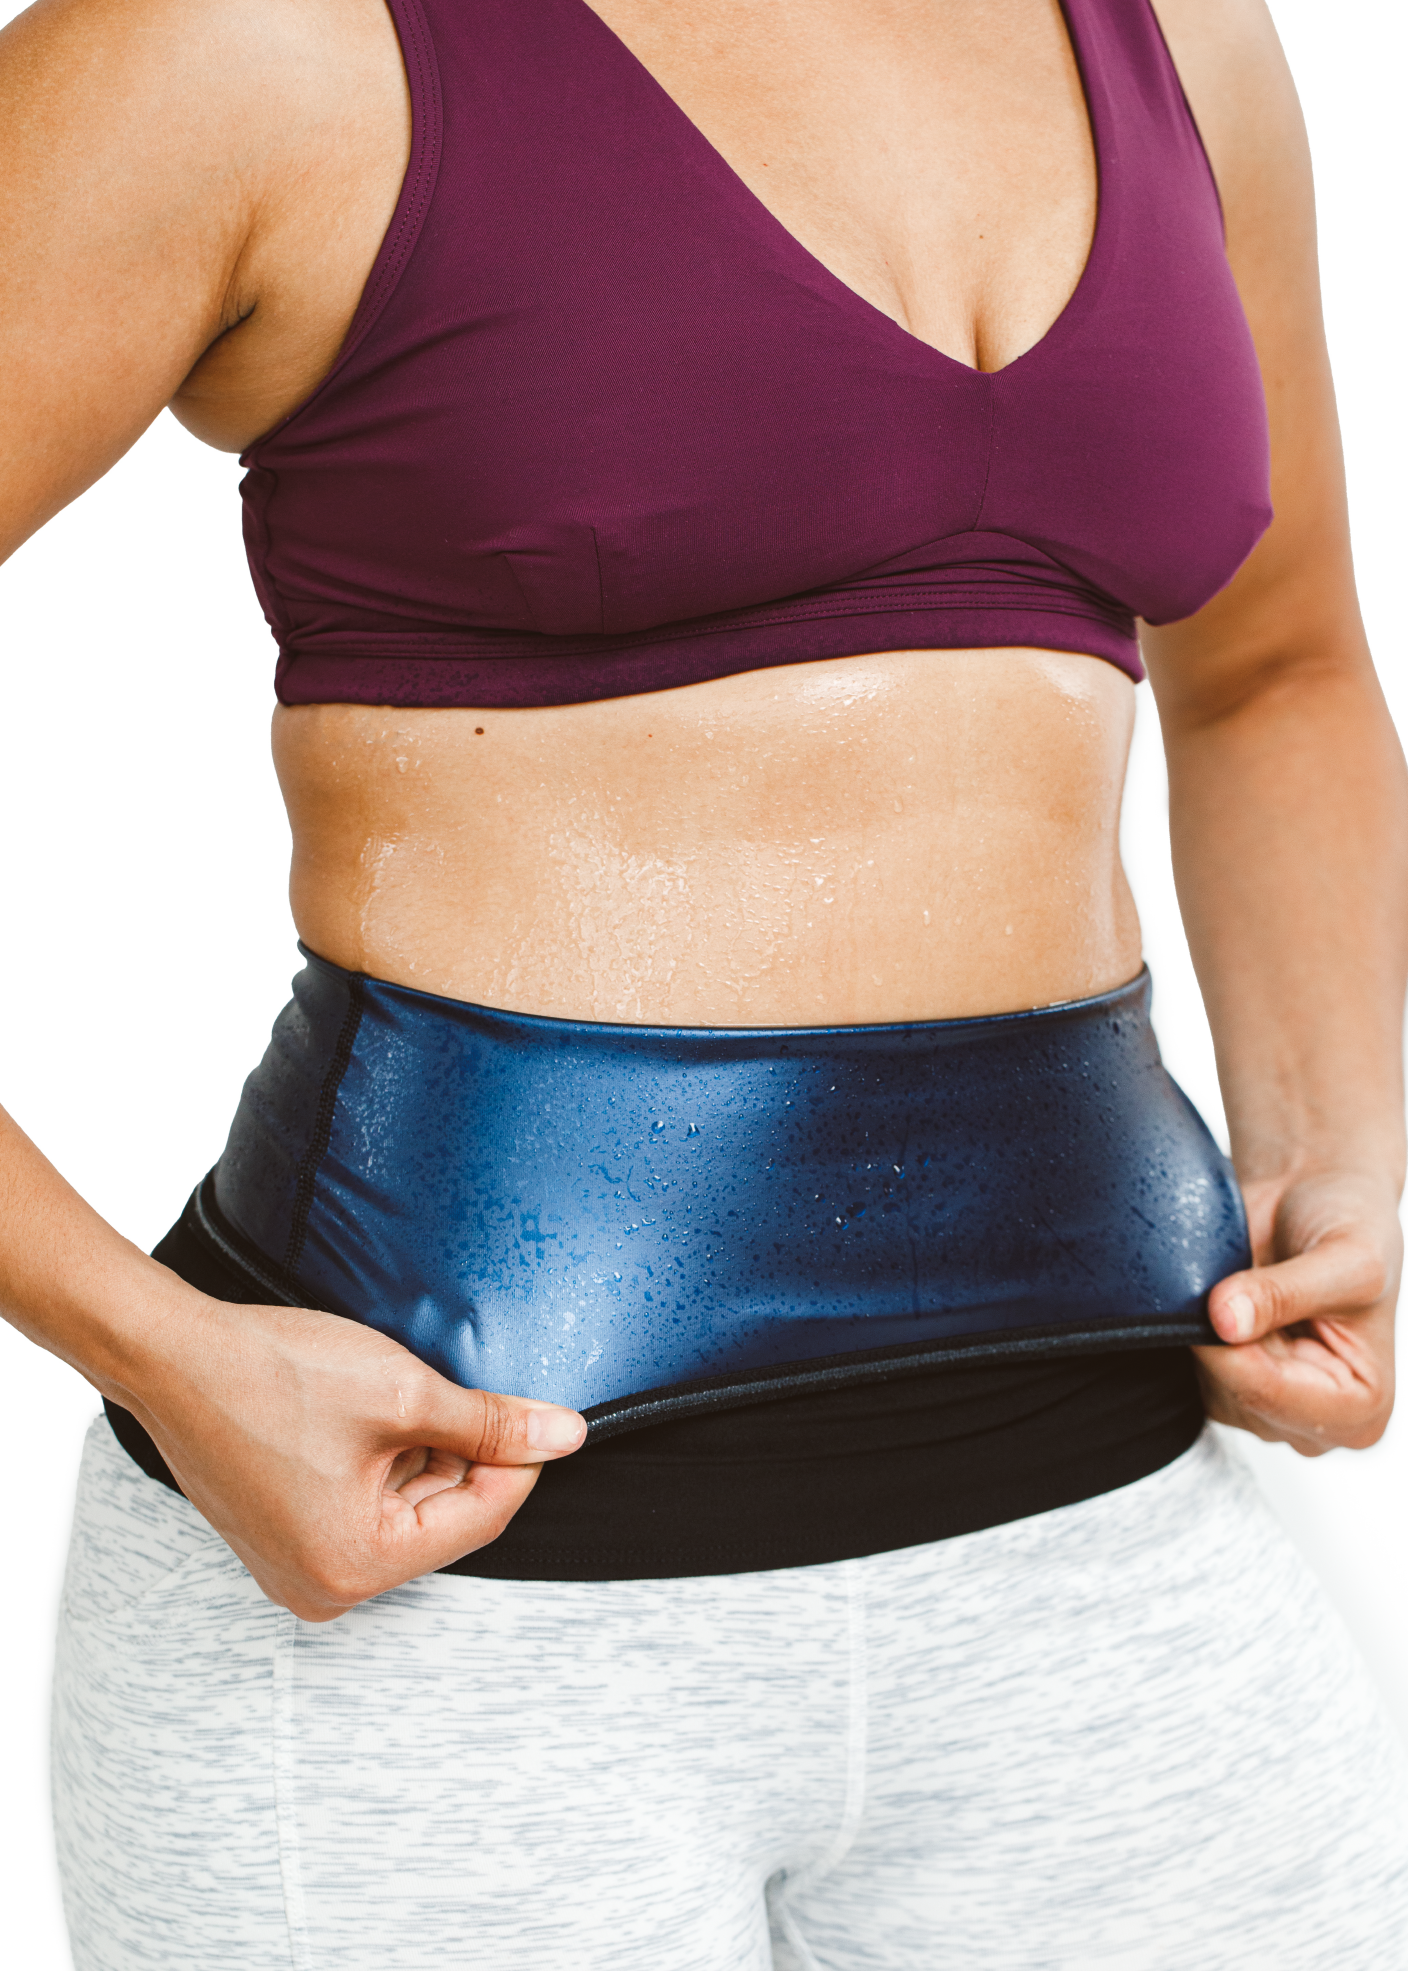 Sweat Shaper™ Official Site – Sweat Enhancing Compression Wear